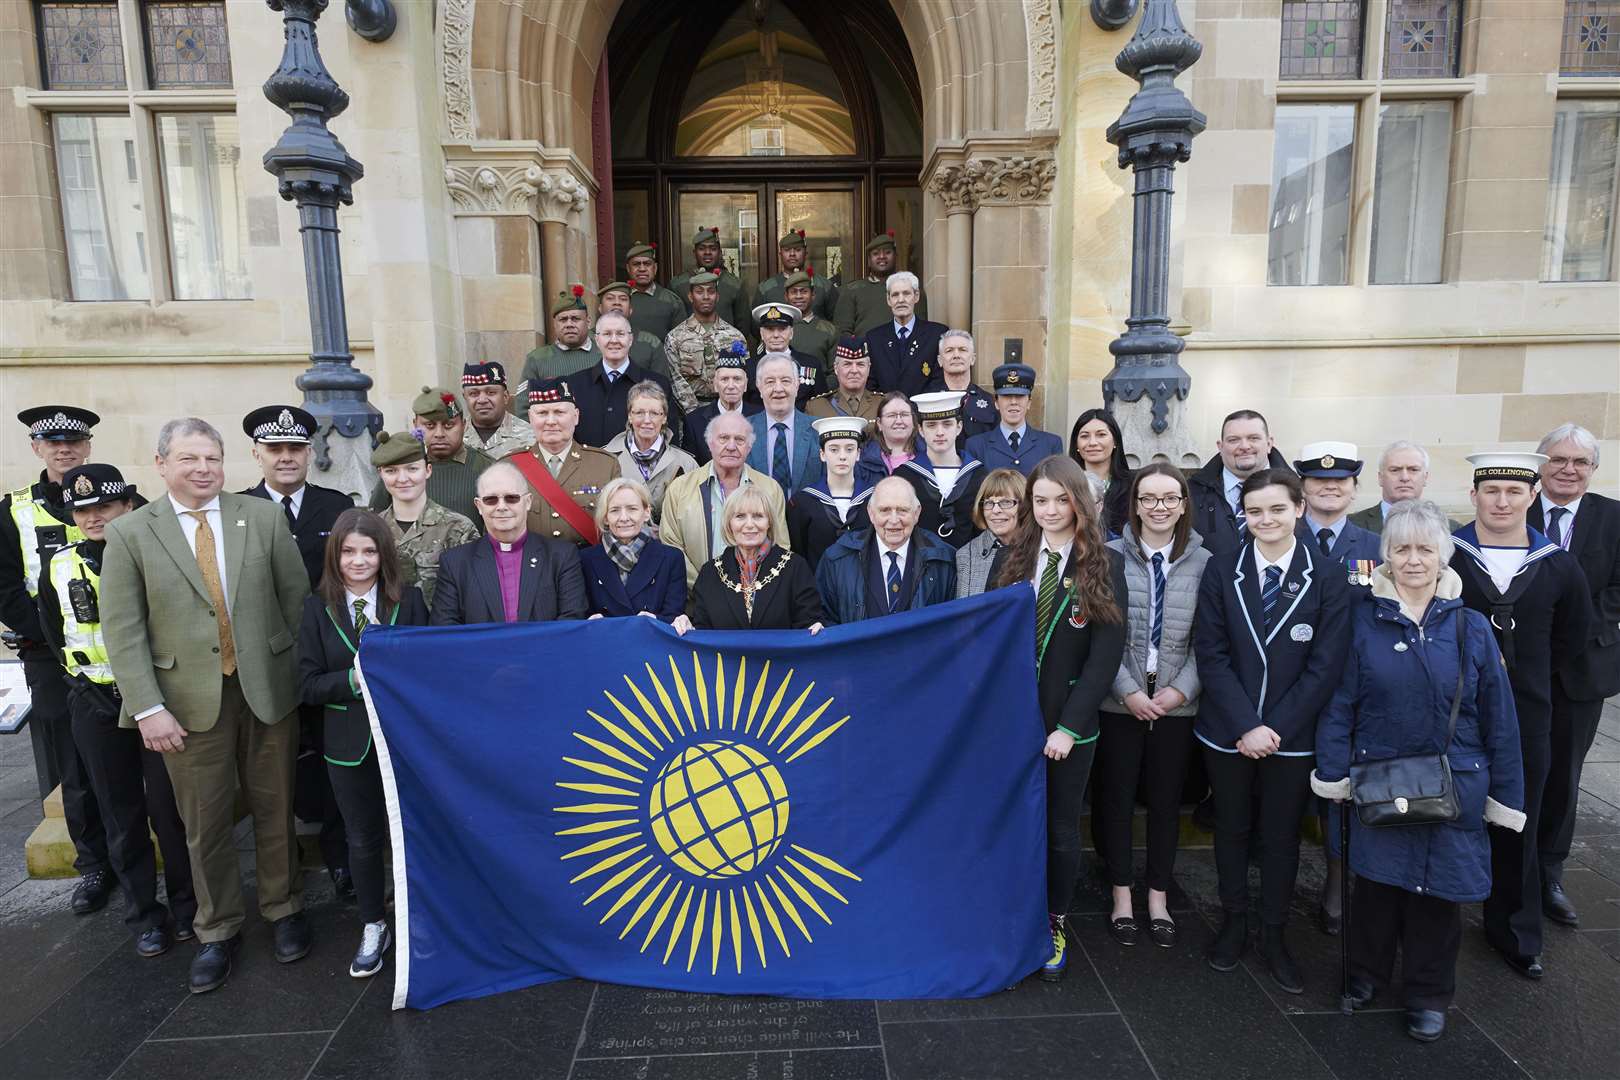 Members of Highland Council and officials lead the Commonwealth Day celebrations.